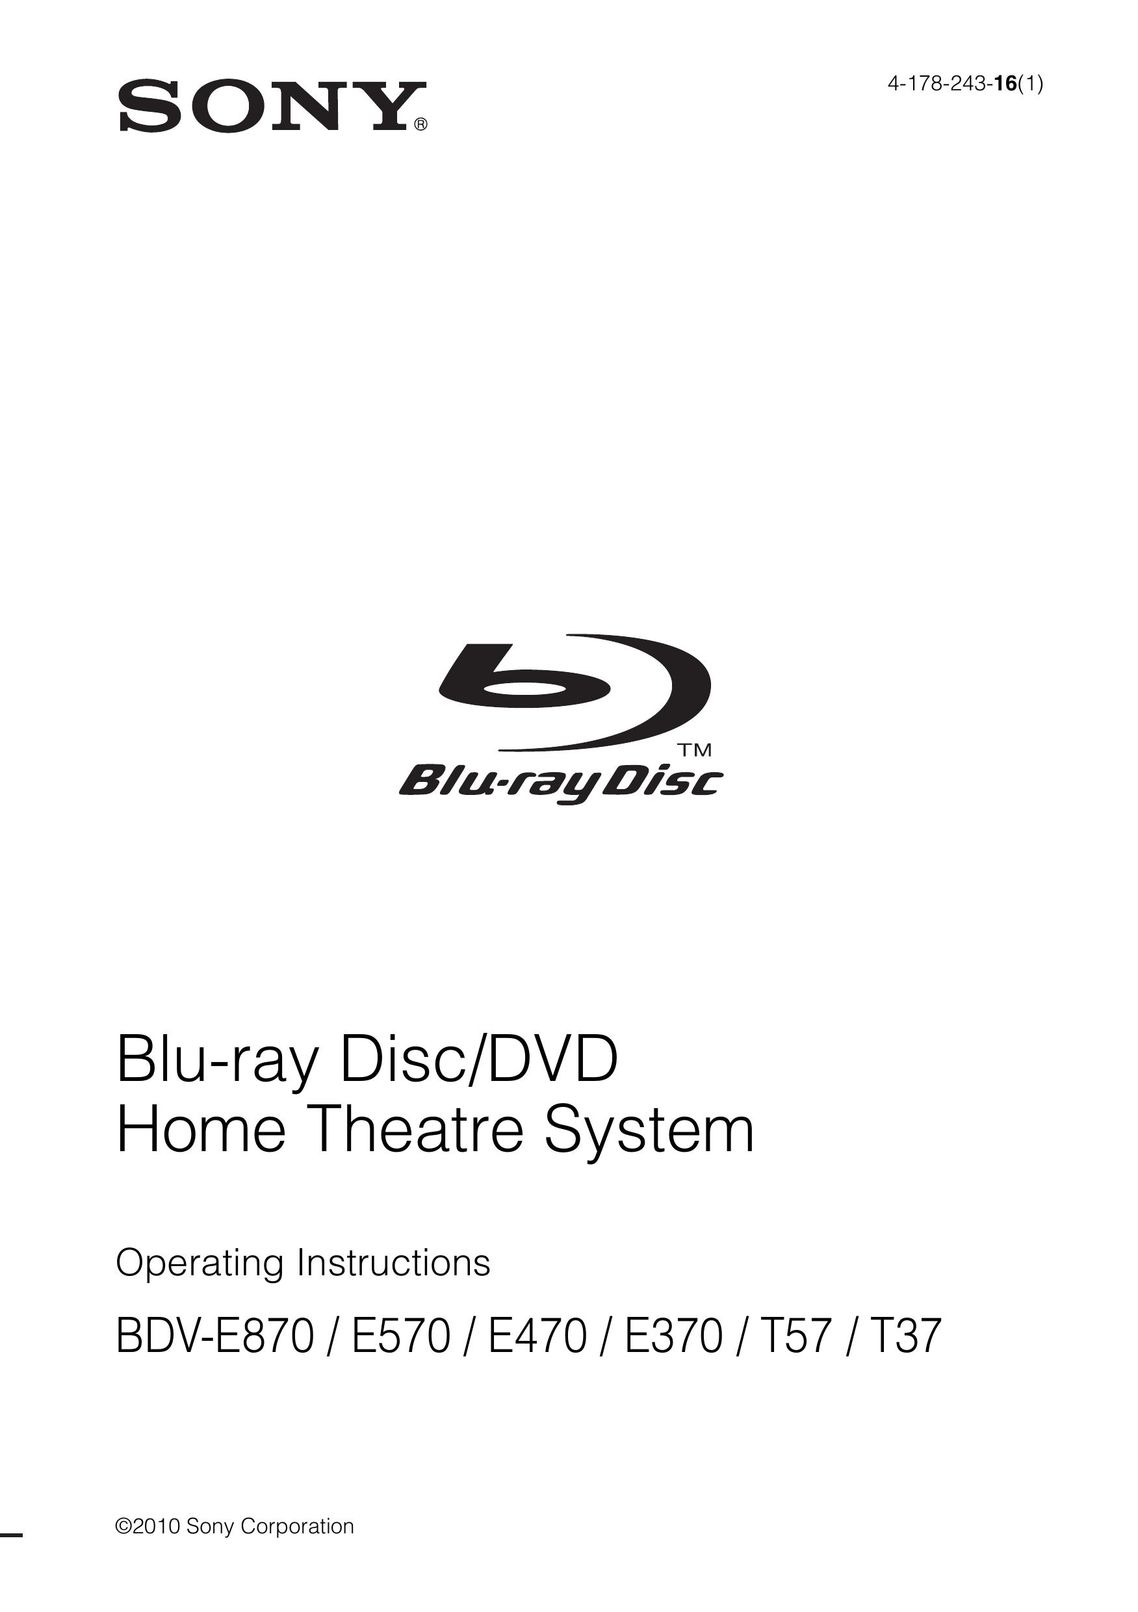 Sony BDV-E570 Home Theater System User Manual